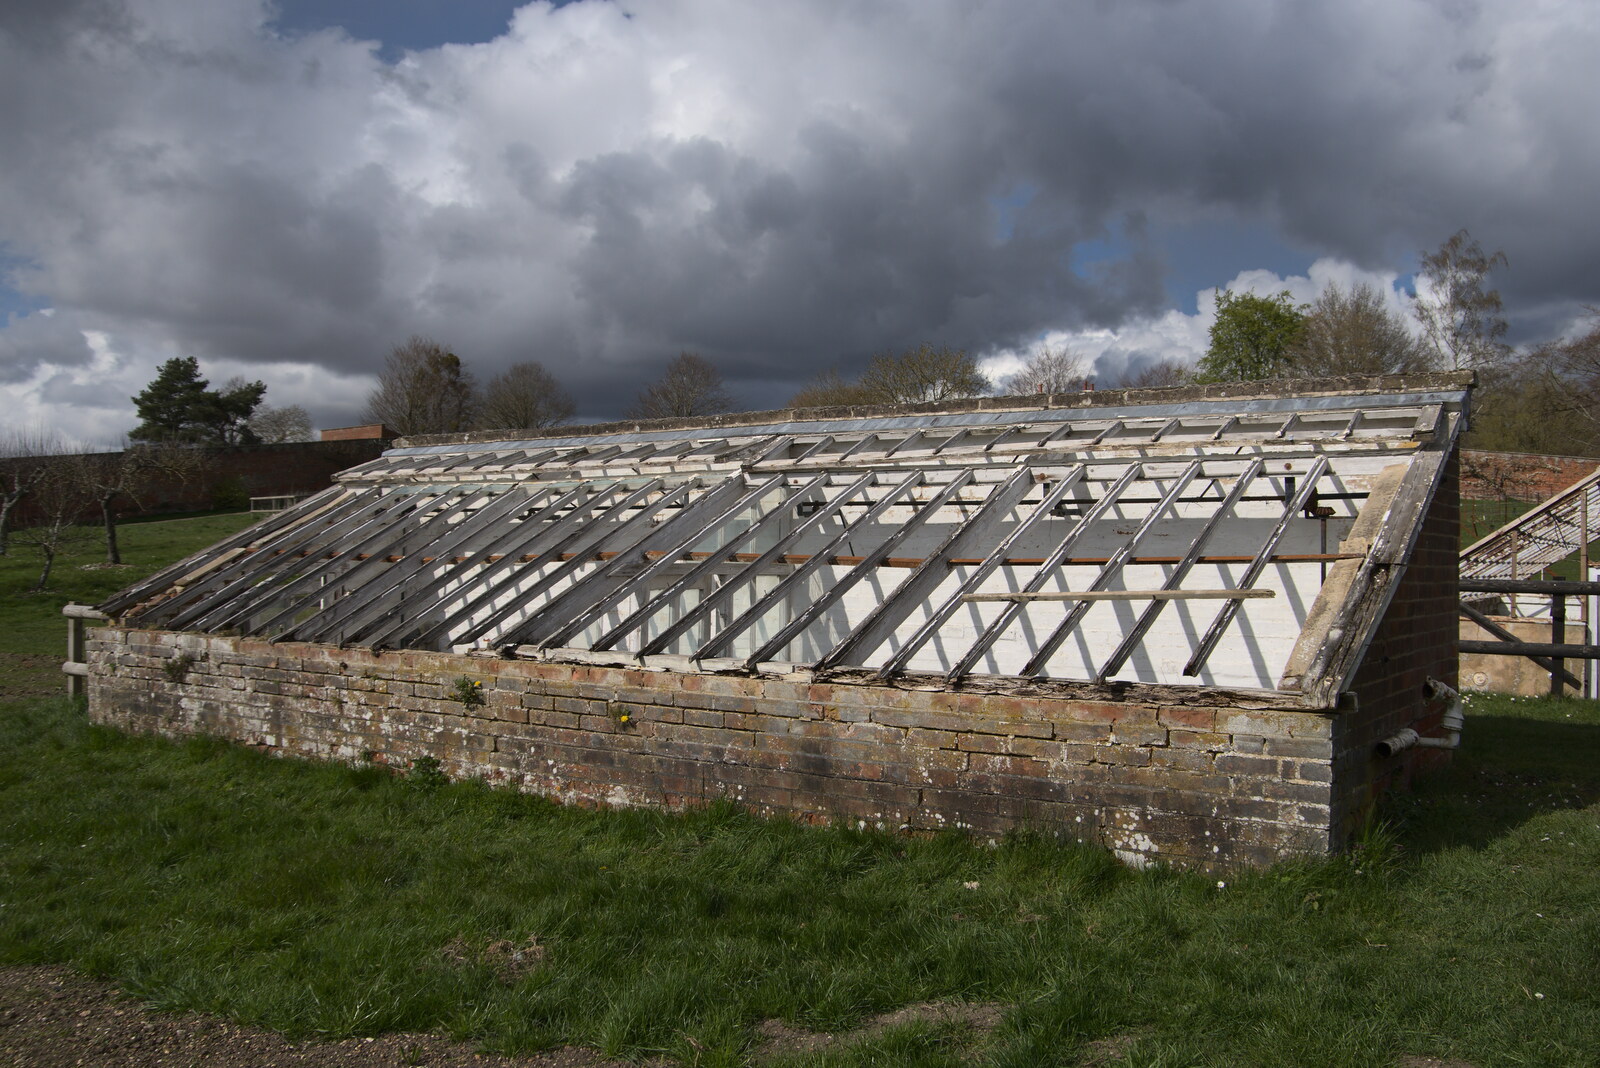 A derelict cold frame from A Return to Ickworth House, Horringer, Suffolk - 11th April 2021